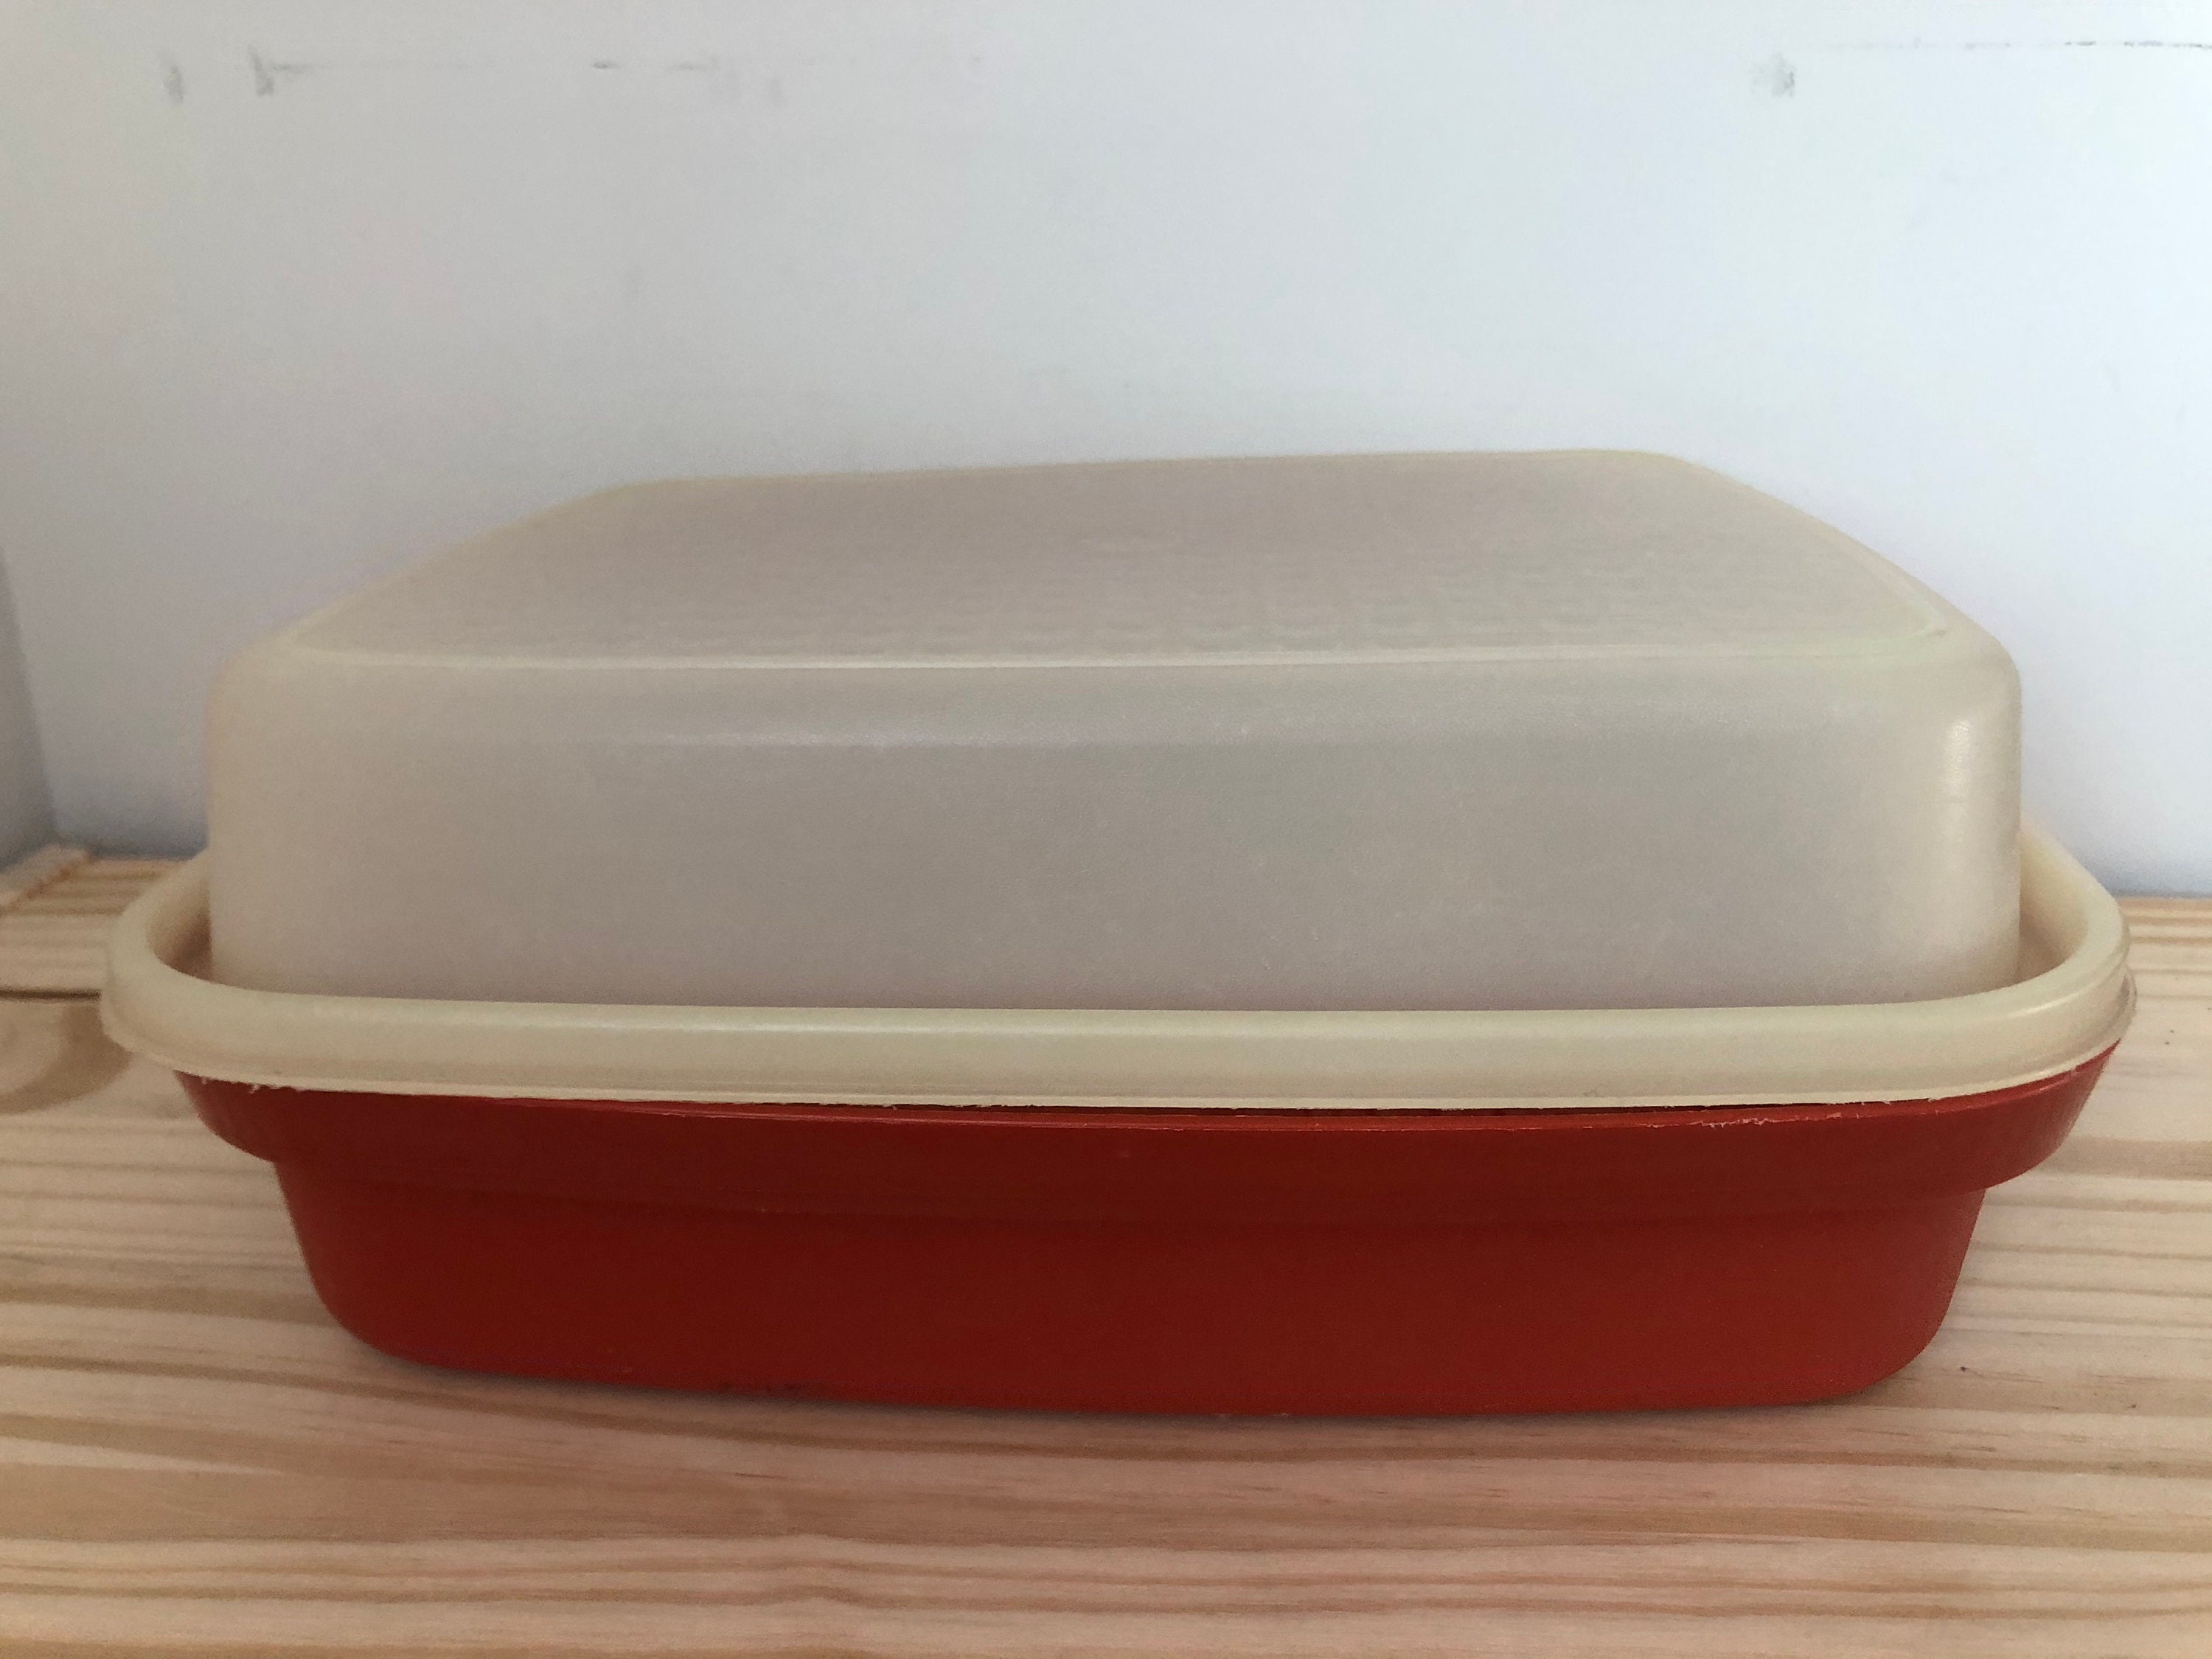 Tupperware Large Season Serve Marinade Container Paprika Orange Plastic  Food Storage Dish Meat Keeper Picnics BBQ Grilling RV Collectible 